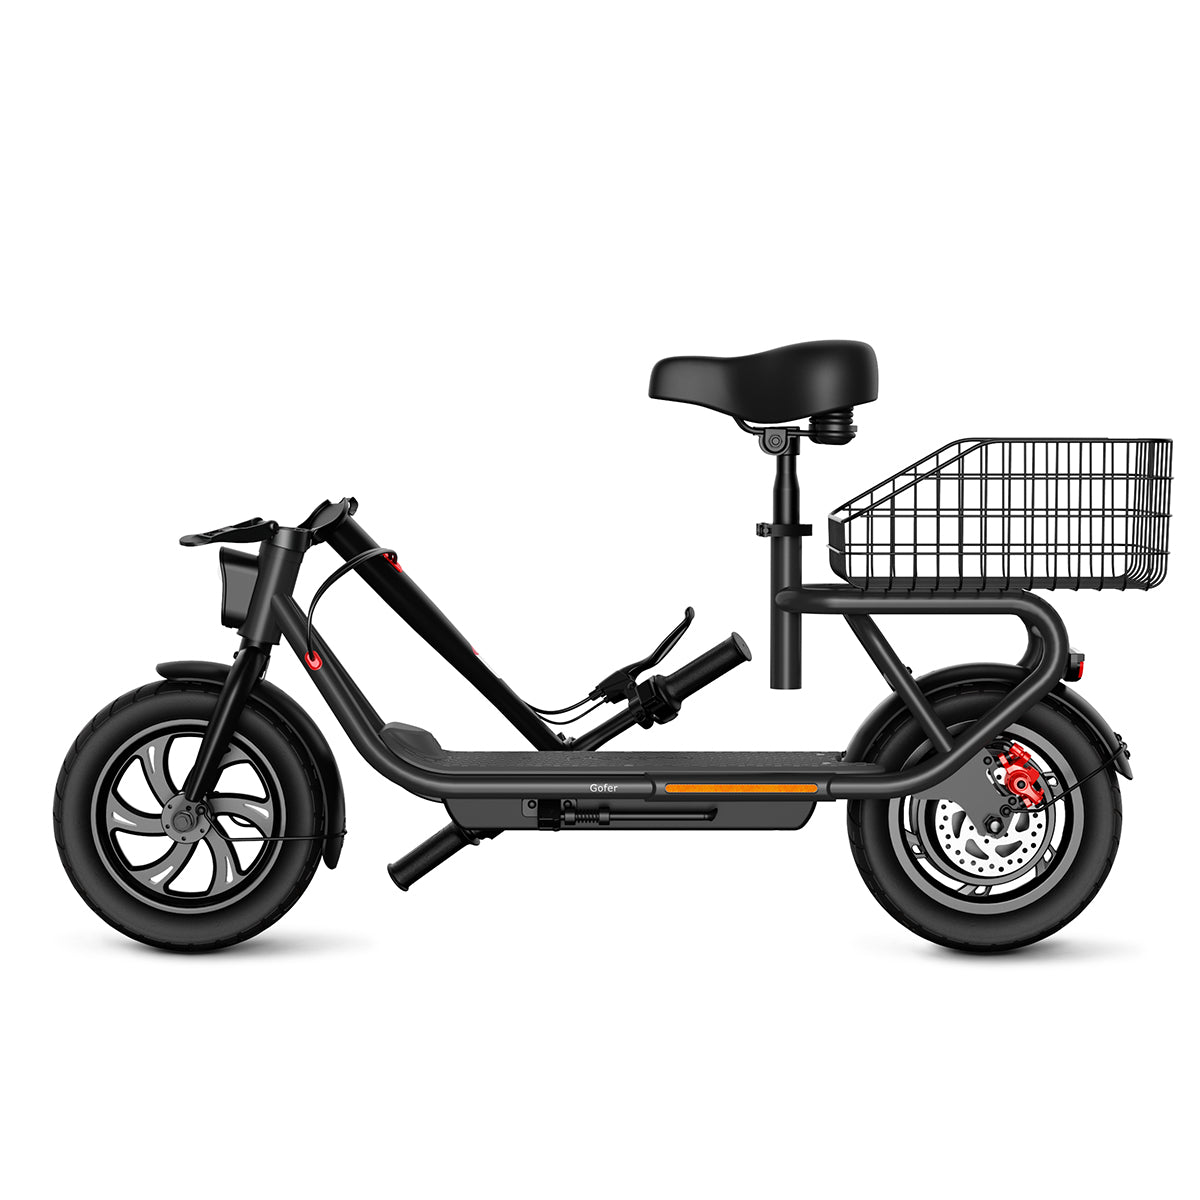 Sisigad Gofer 12“ Fat Tire Electric Bike For Shopping